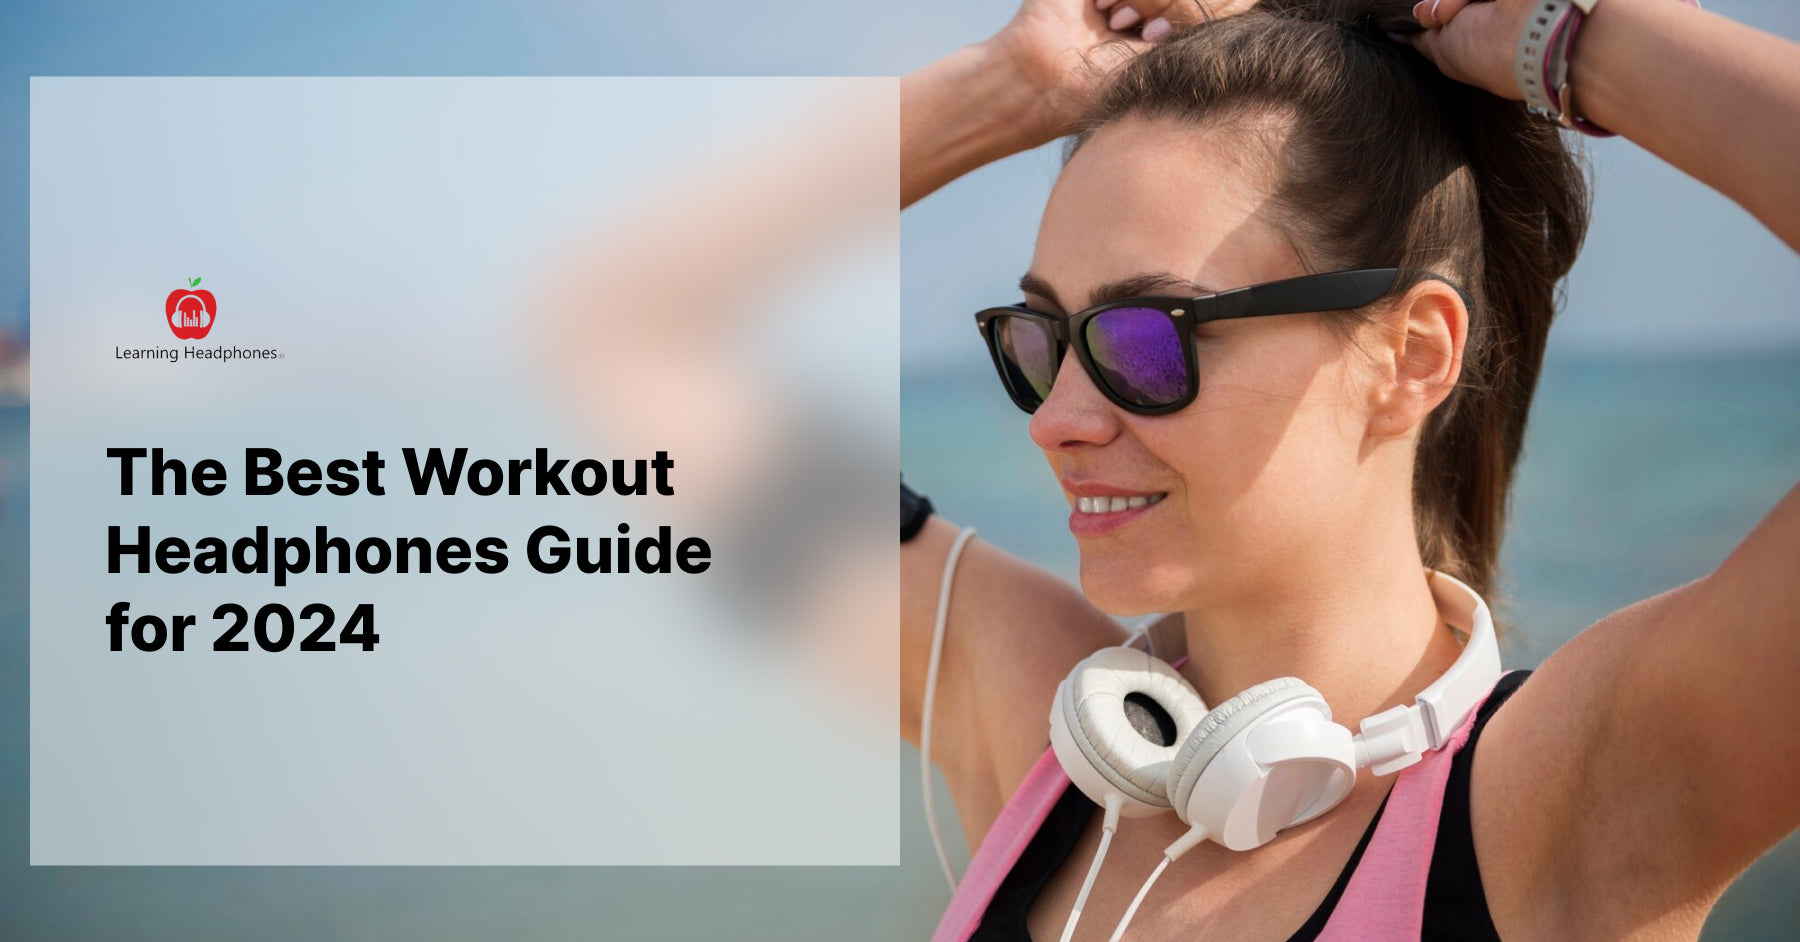 The Best Workout Headphones Guide for 2024